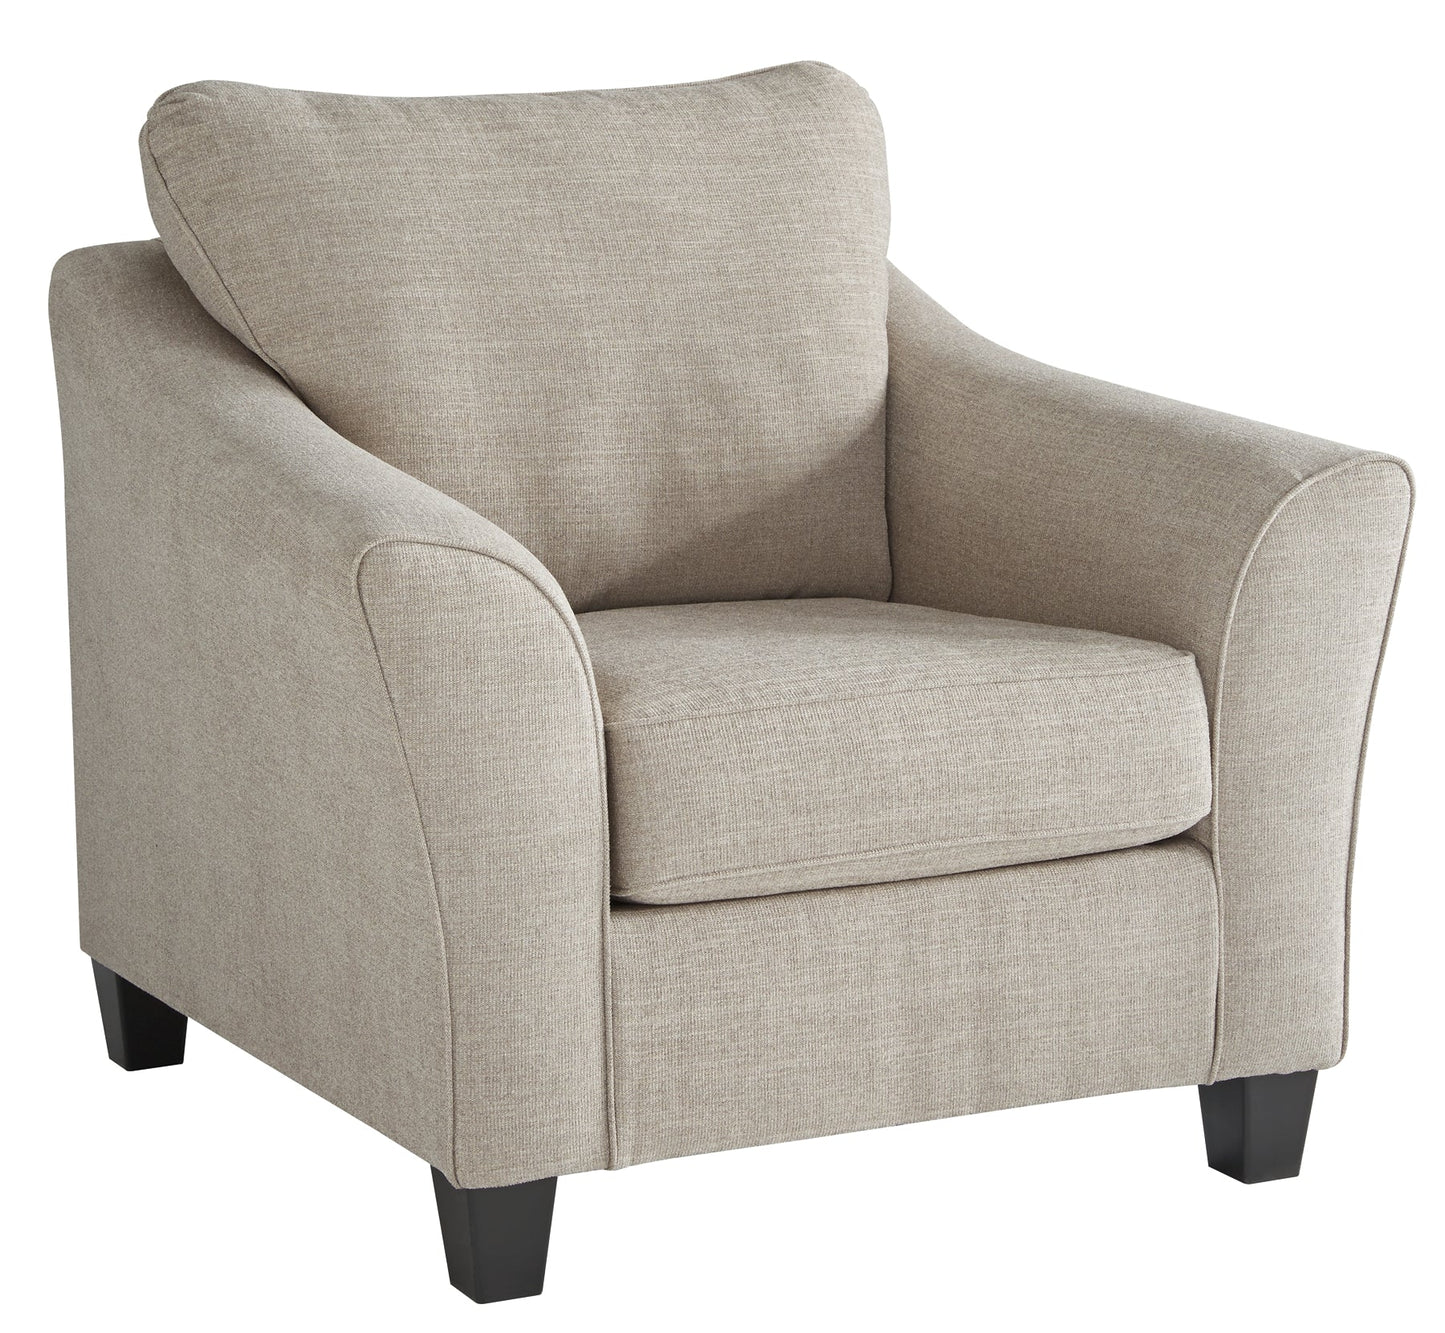 Abney Chair and Ottoman Rent Wise Rent To Own Jacksonville, Florida